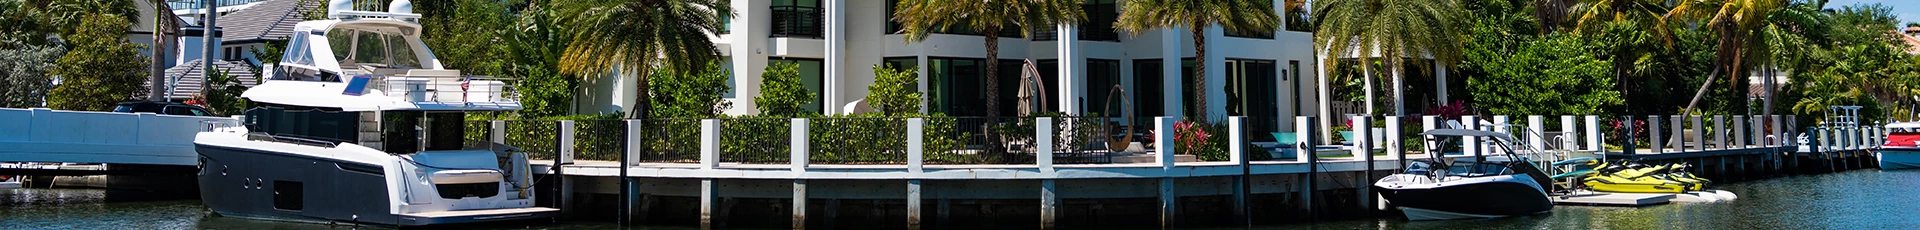 Boat Removal, Dismantle and Disposal in Celebration Florida